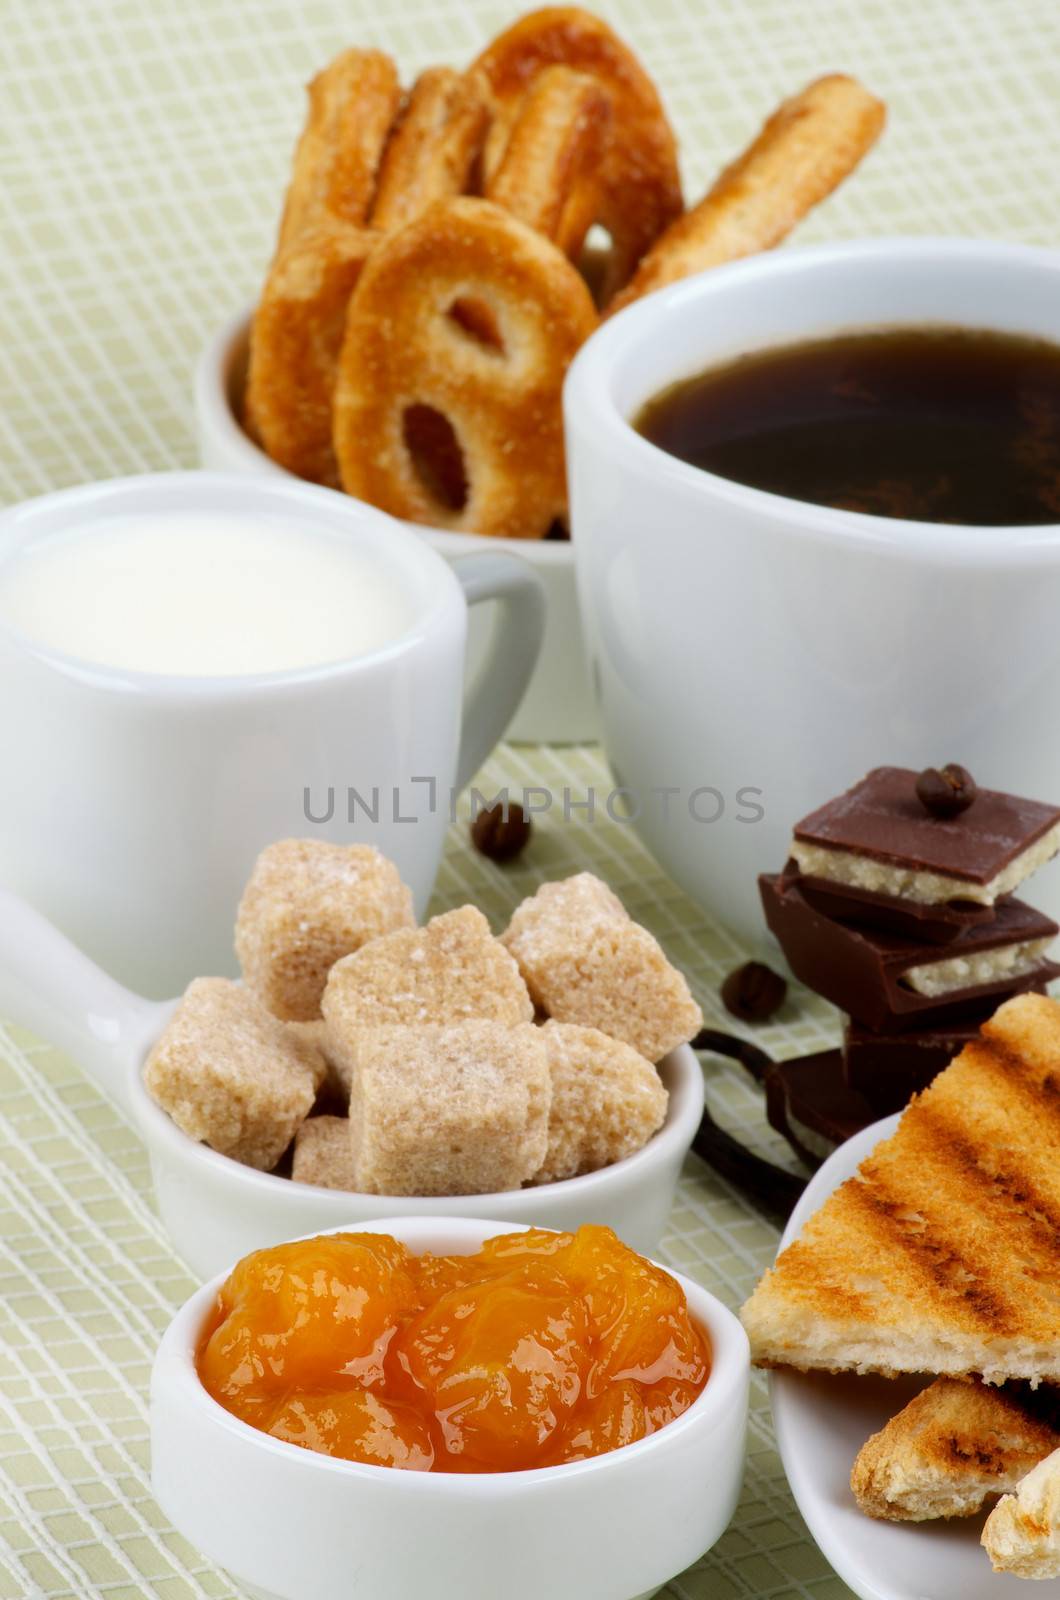 Arrangement of Coffee Cup, Milk, Puff Pastry, Apricot Jam and Toasts with Chocolate and Brown Sugar Cubes closeup on light green Checkered background